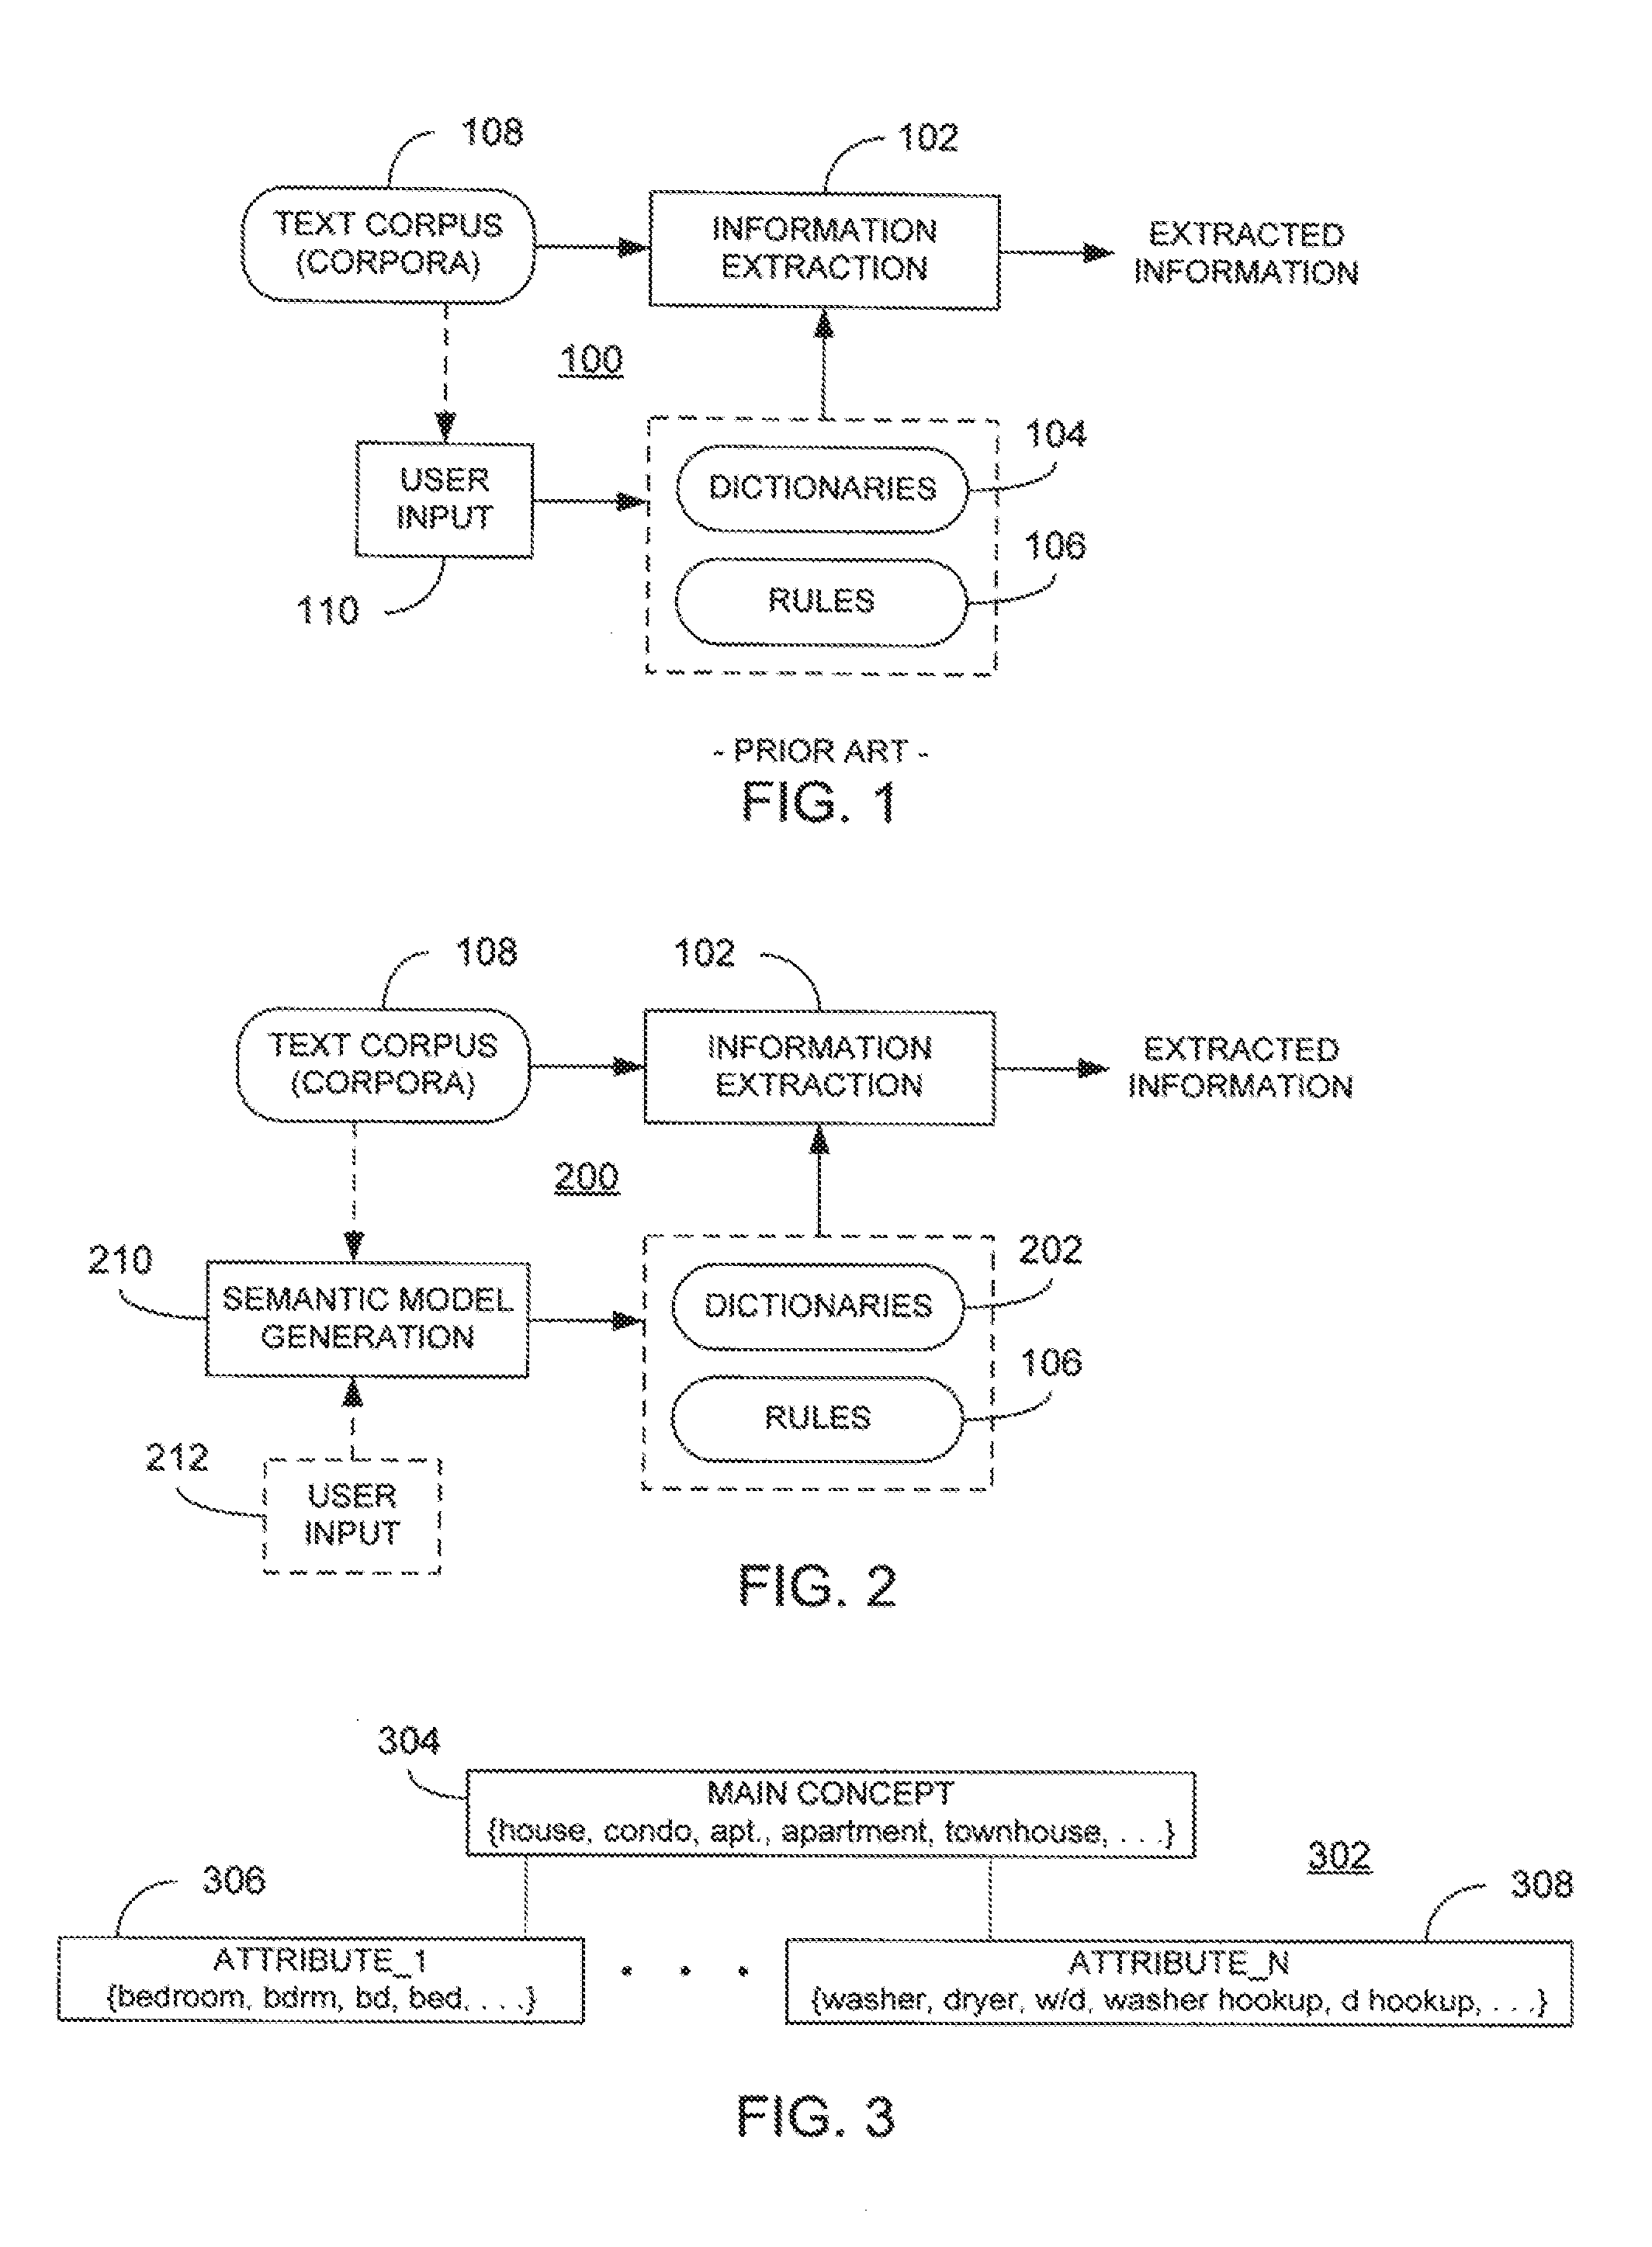 Generation of a semantic model from textual listings